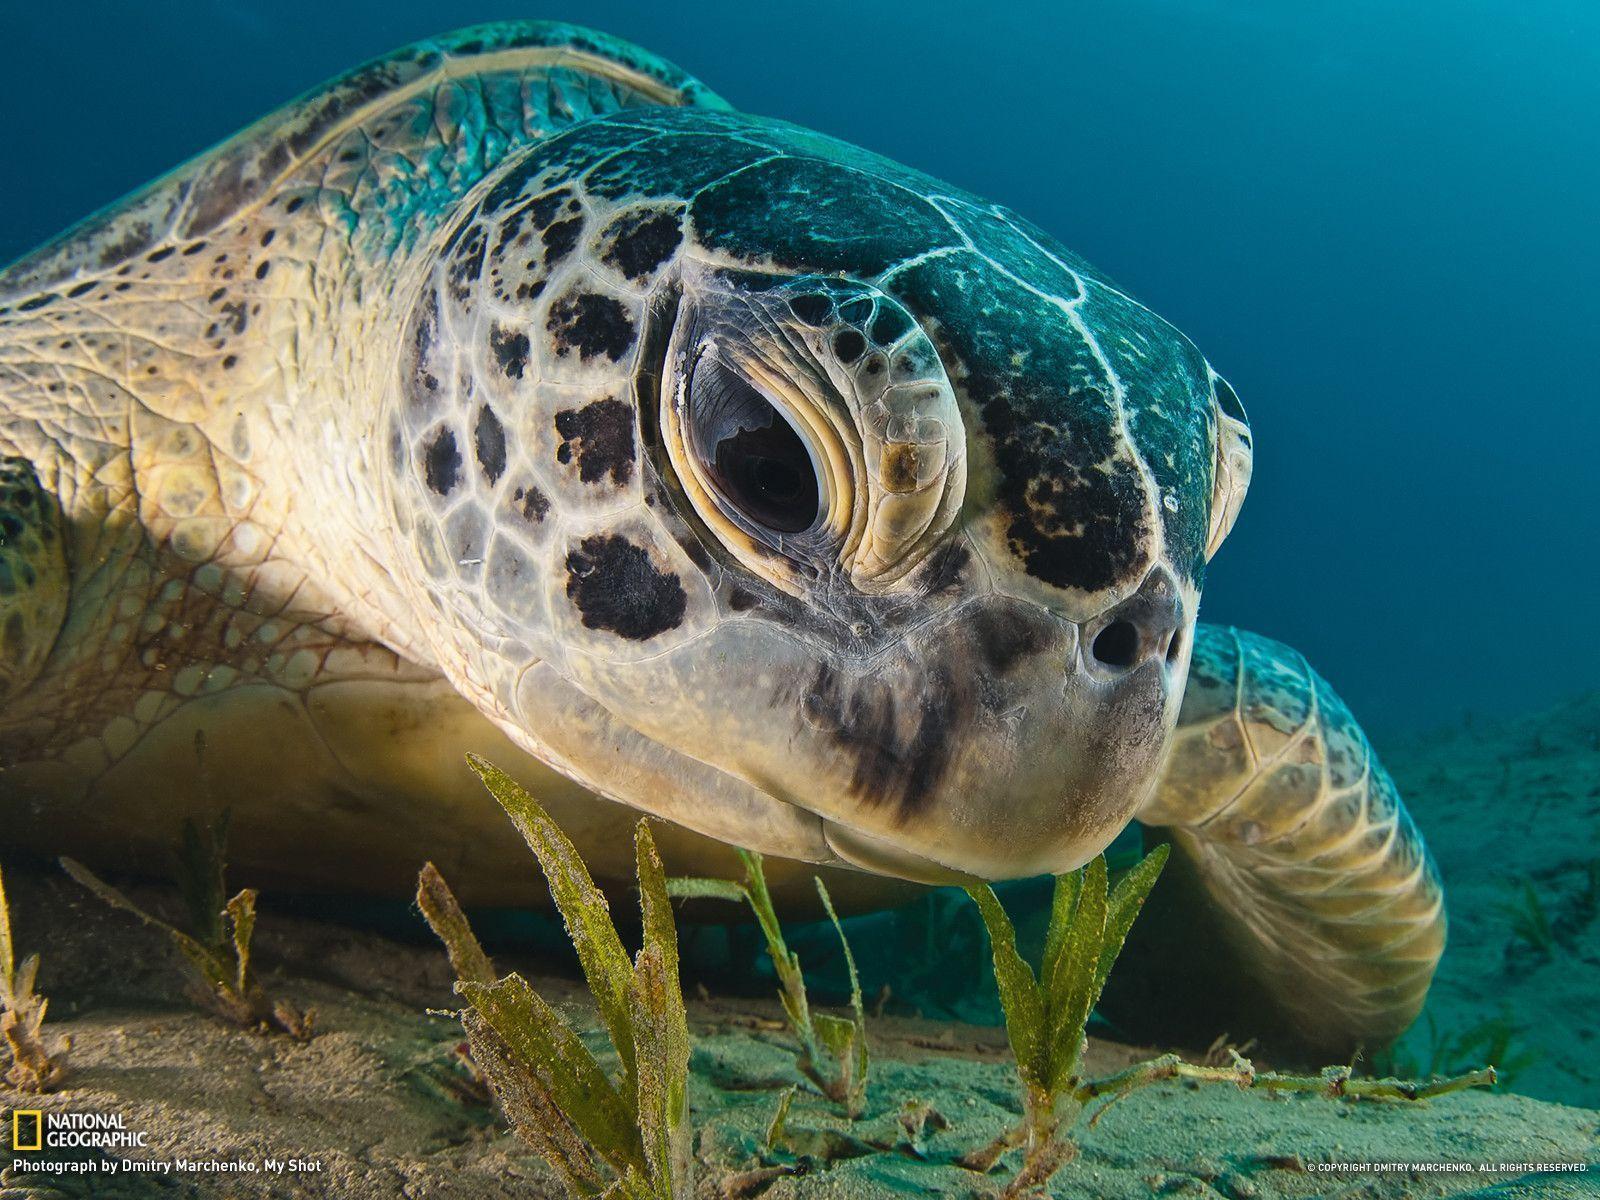 Green Sea Turtle Picture - Underwater Wallpaper - National